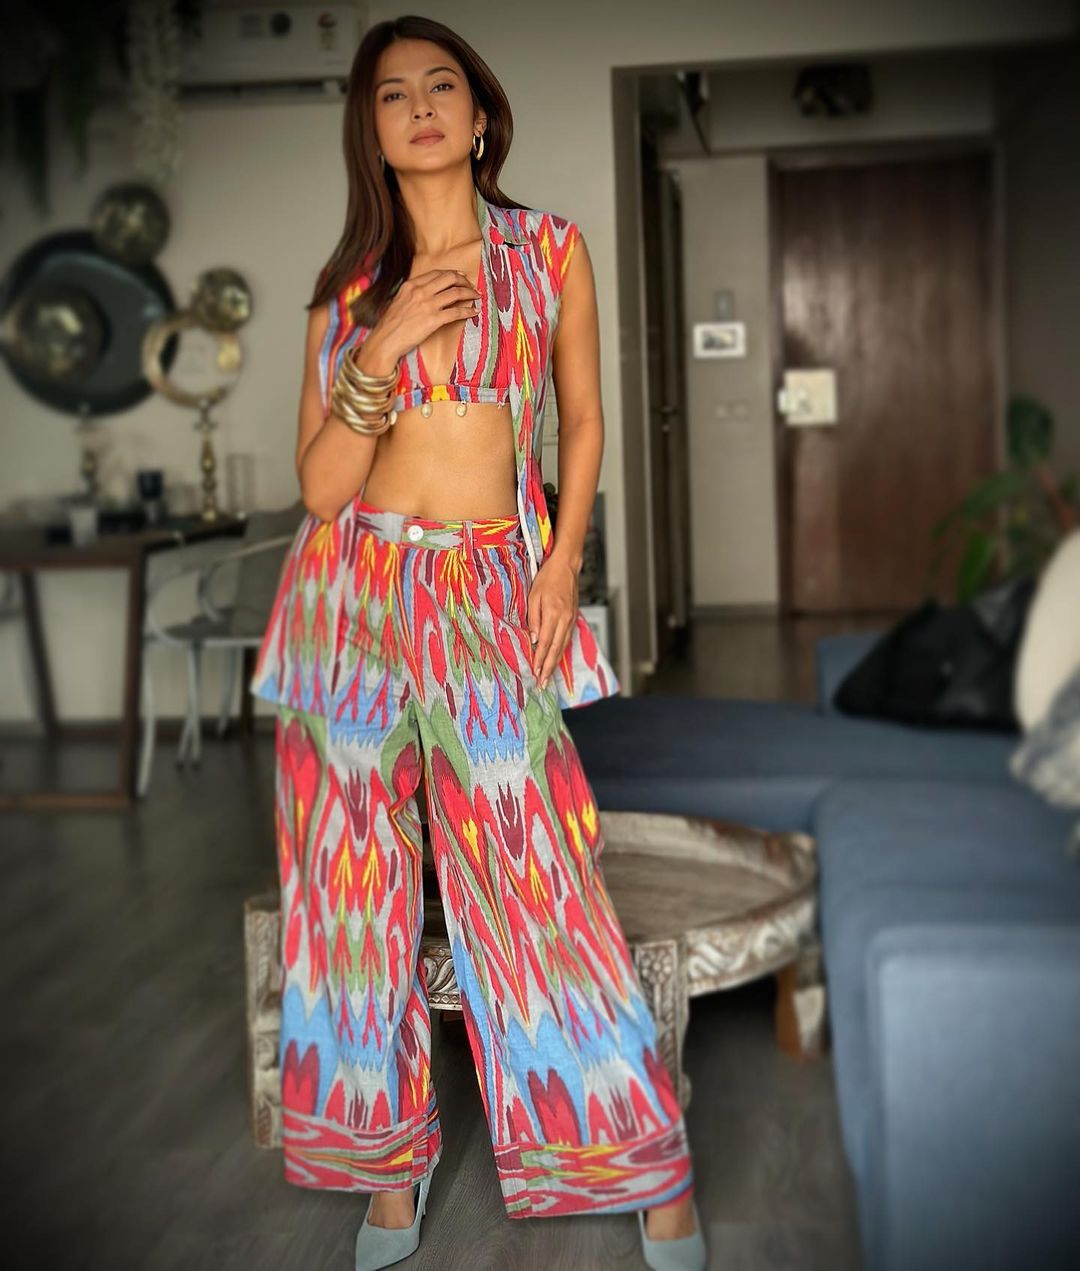 Actress jennifer winget looks amazing in this pose-Actressjennifer, Jennifer Winget Photos,Spicy Hot Pics,Images,High Resolution WallPapers Download